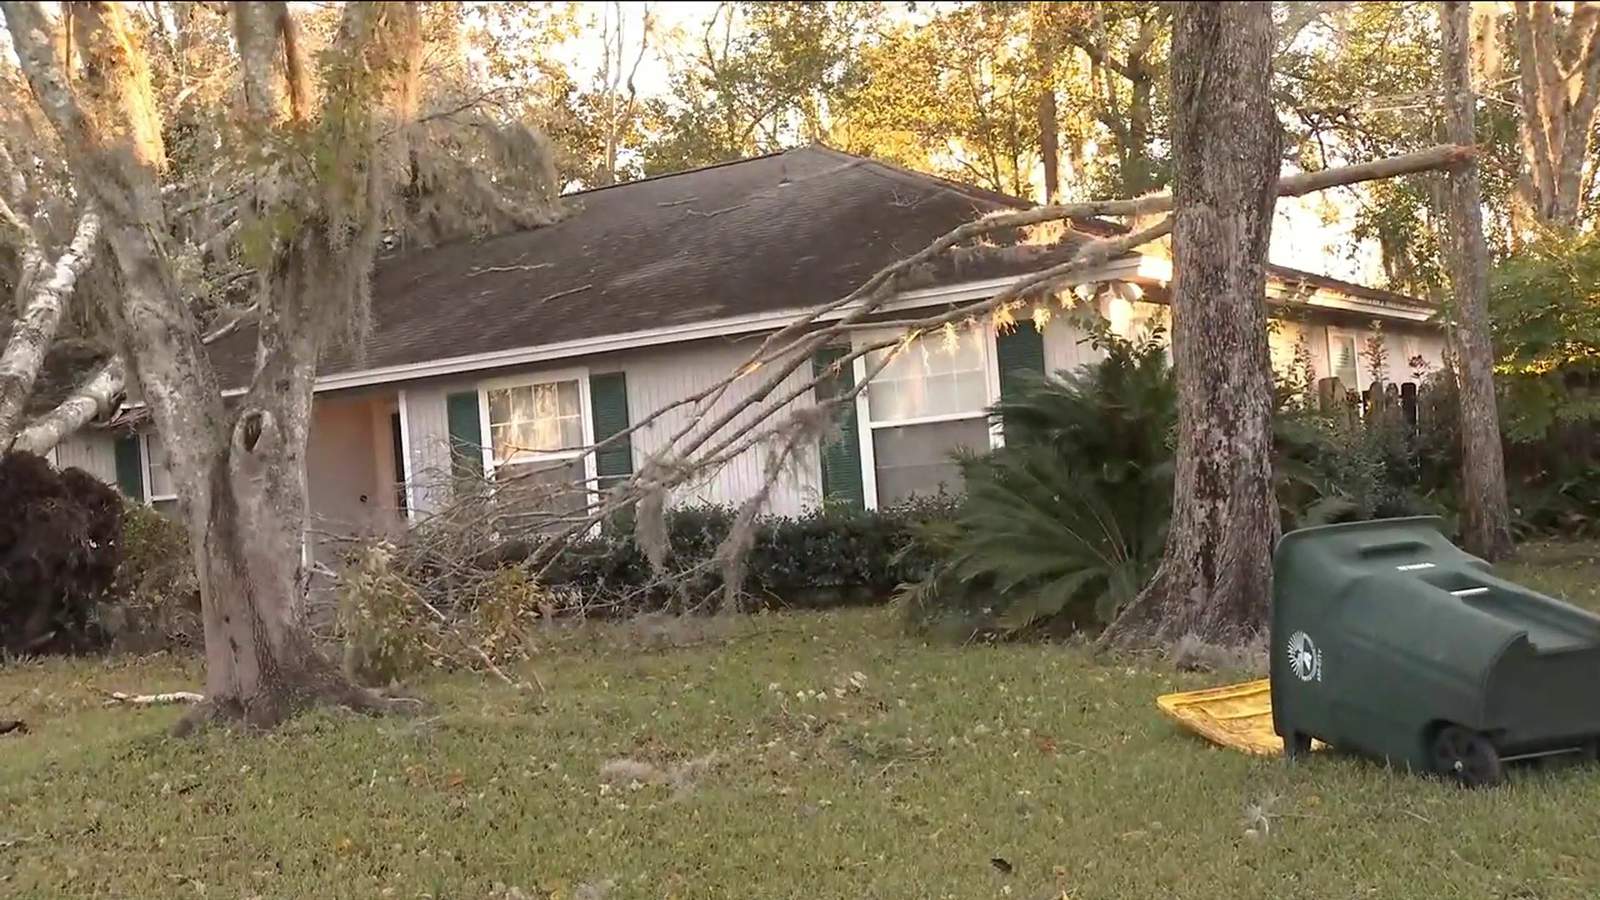 Neighbors assess damage caused by Christmas Eve storms